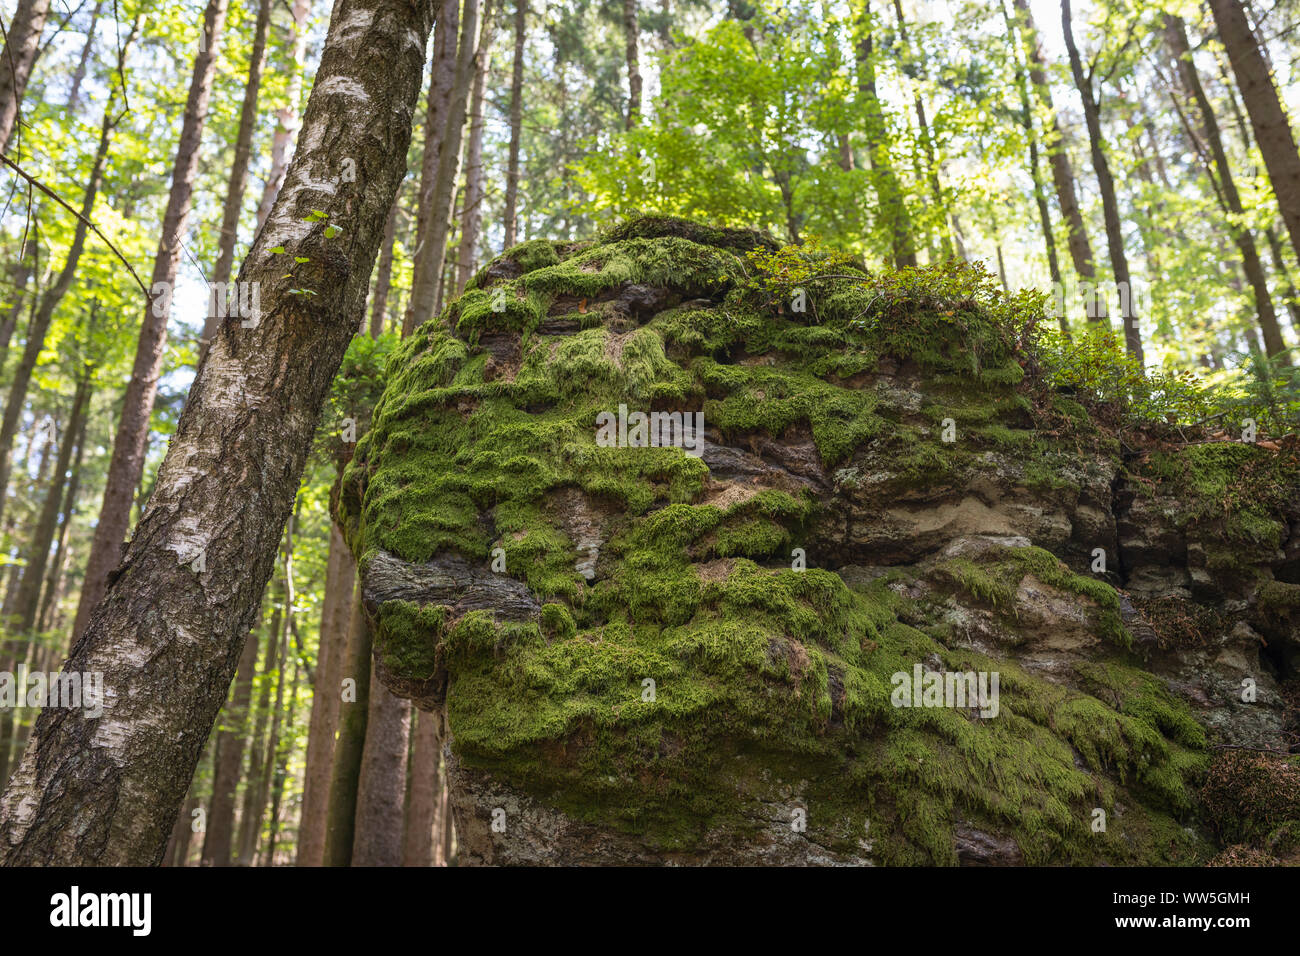 Rock gathering moss in national park forest 'Bayerischer Wald', Bavaria, Germany Stock Photo